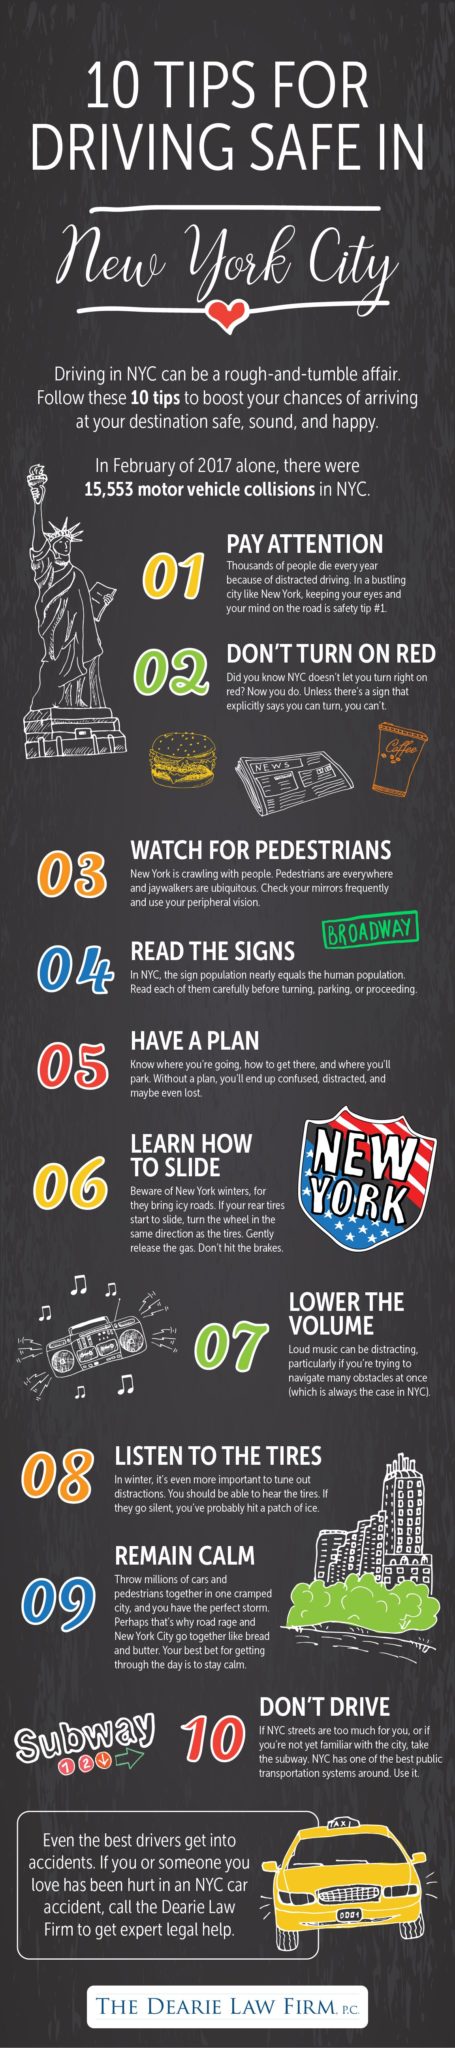 Driving Safe in New York City Infographic